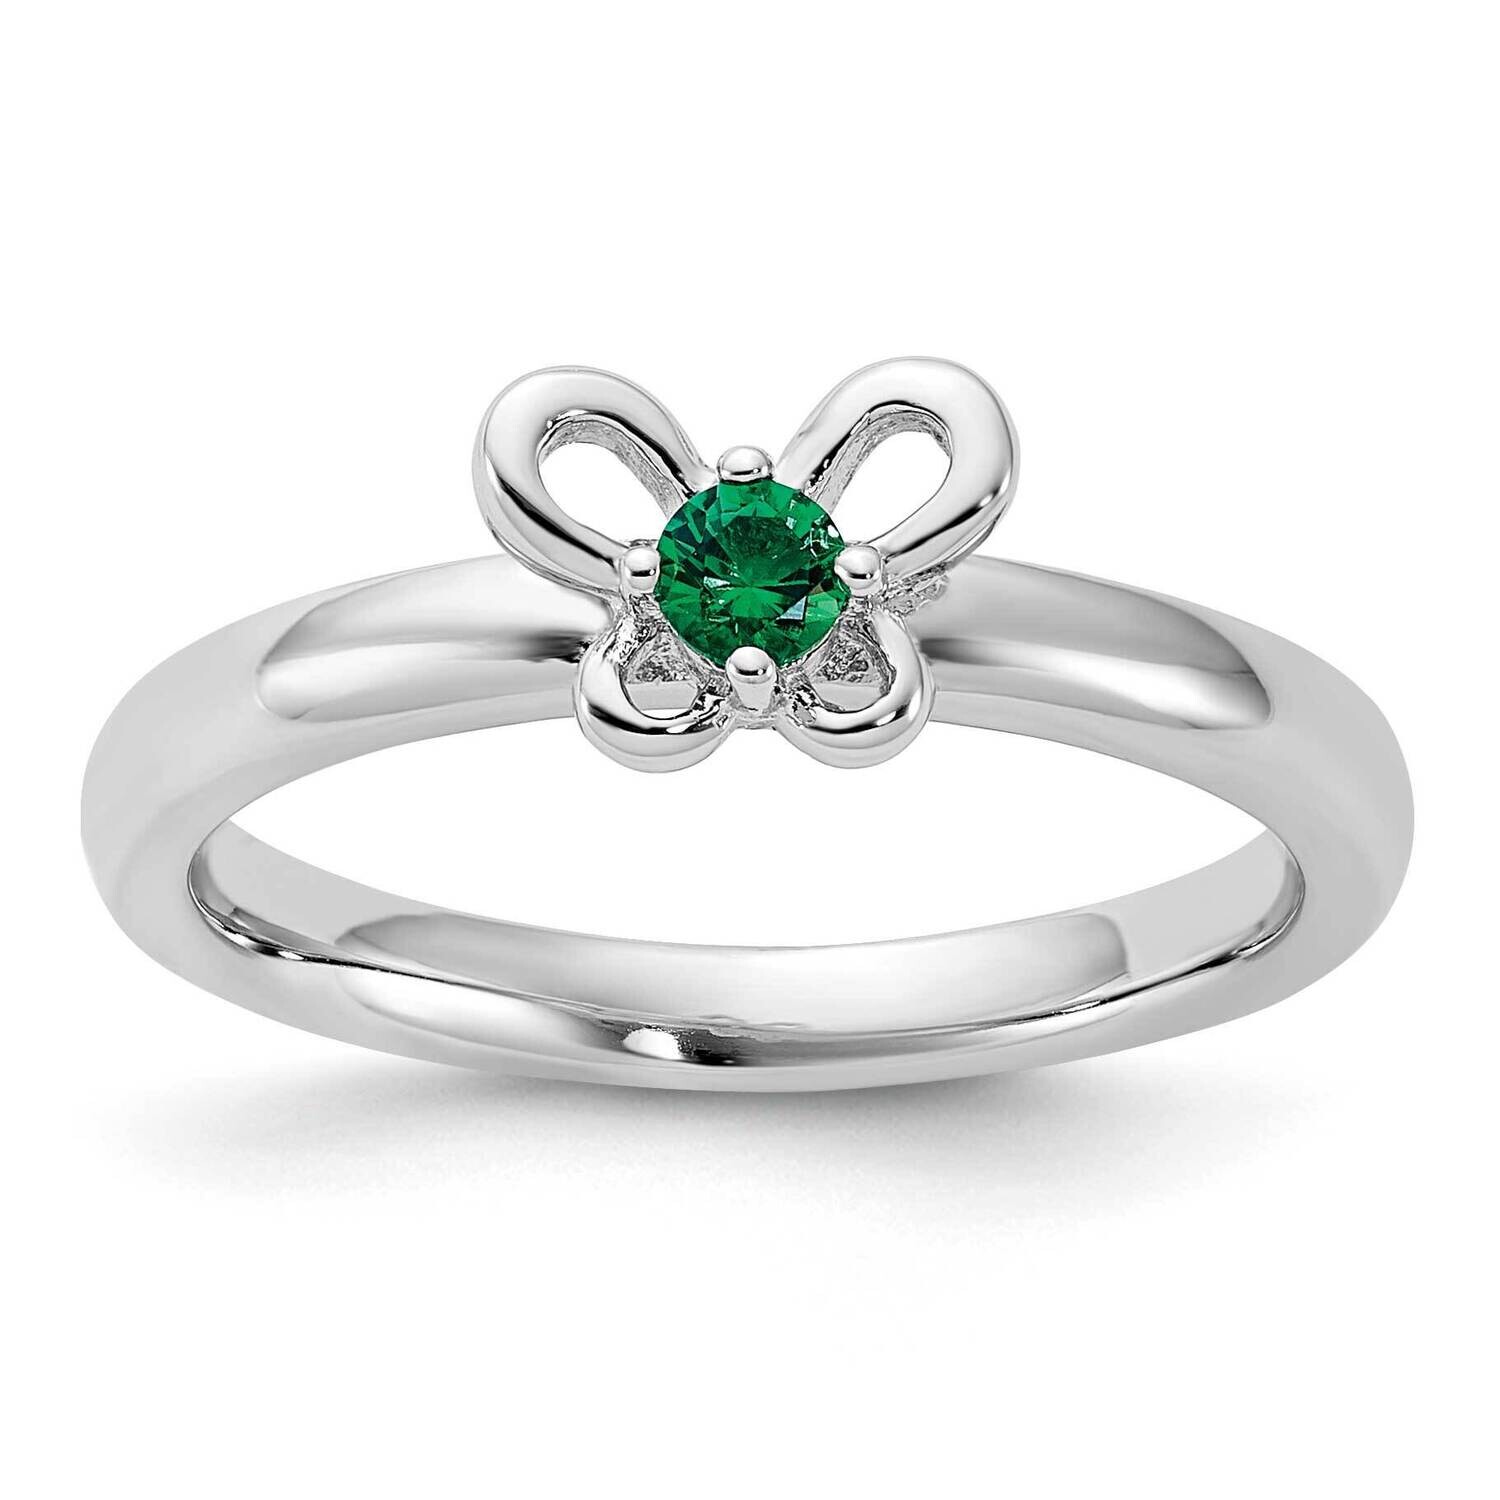 Stackable Expressions Created Emerald Ring Sterling Silver QSK1240